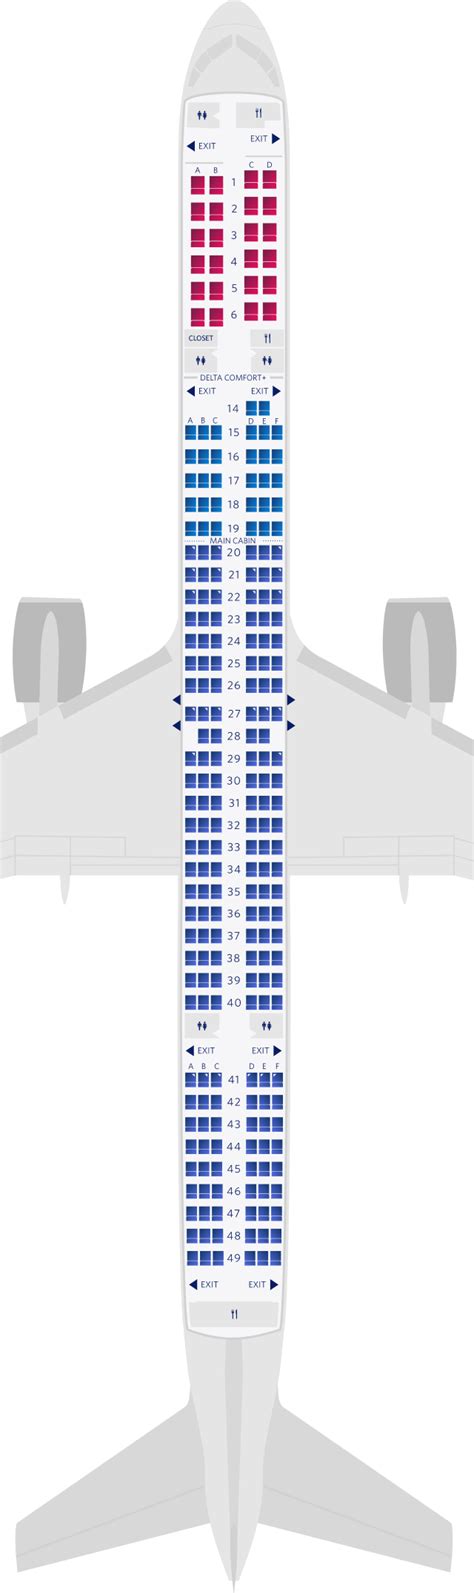 United 757-300 seat map. Flying in seat 19A on a United Airlines Boeing 757-300 soon? Read reviews of seat 19A and find a better seat with our United Airlines seating charts. seat nk beta. seat nk beta. airlines. Browse All. A. Adria Airways; ... United Airlines Boeing 757 300 Seat Map; Seat 19a; United Airlines Reviews. 